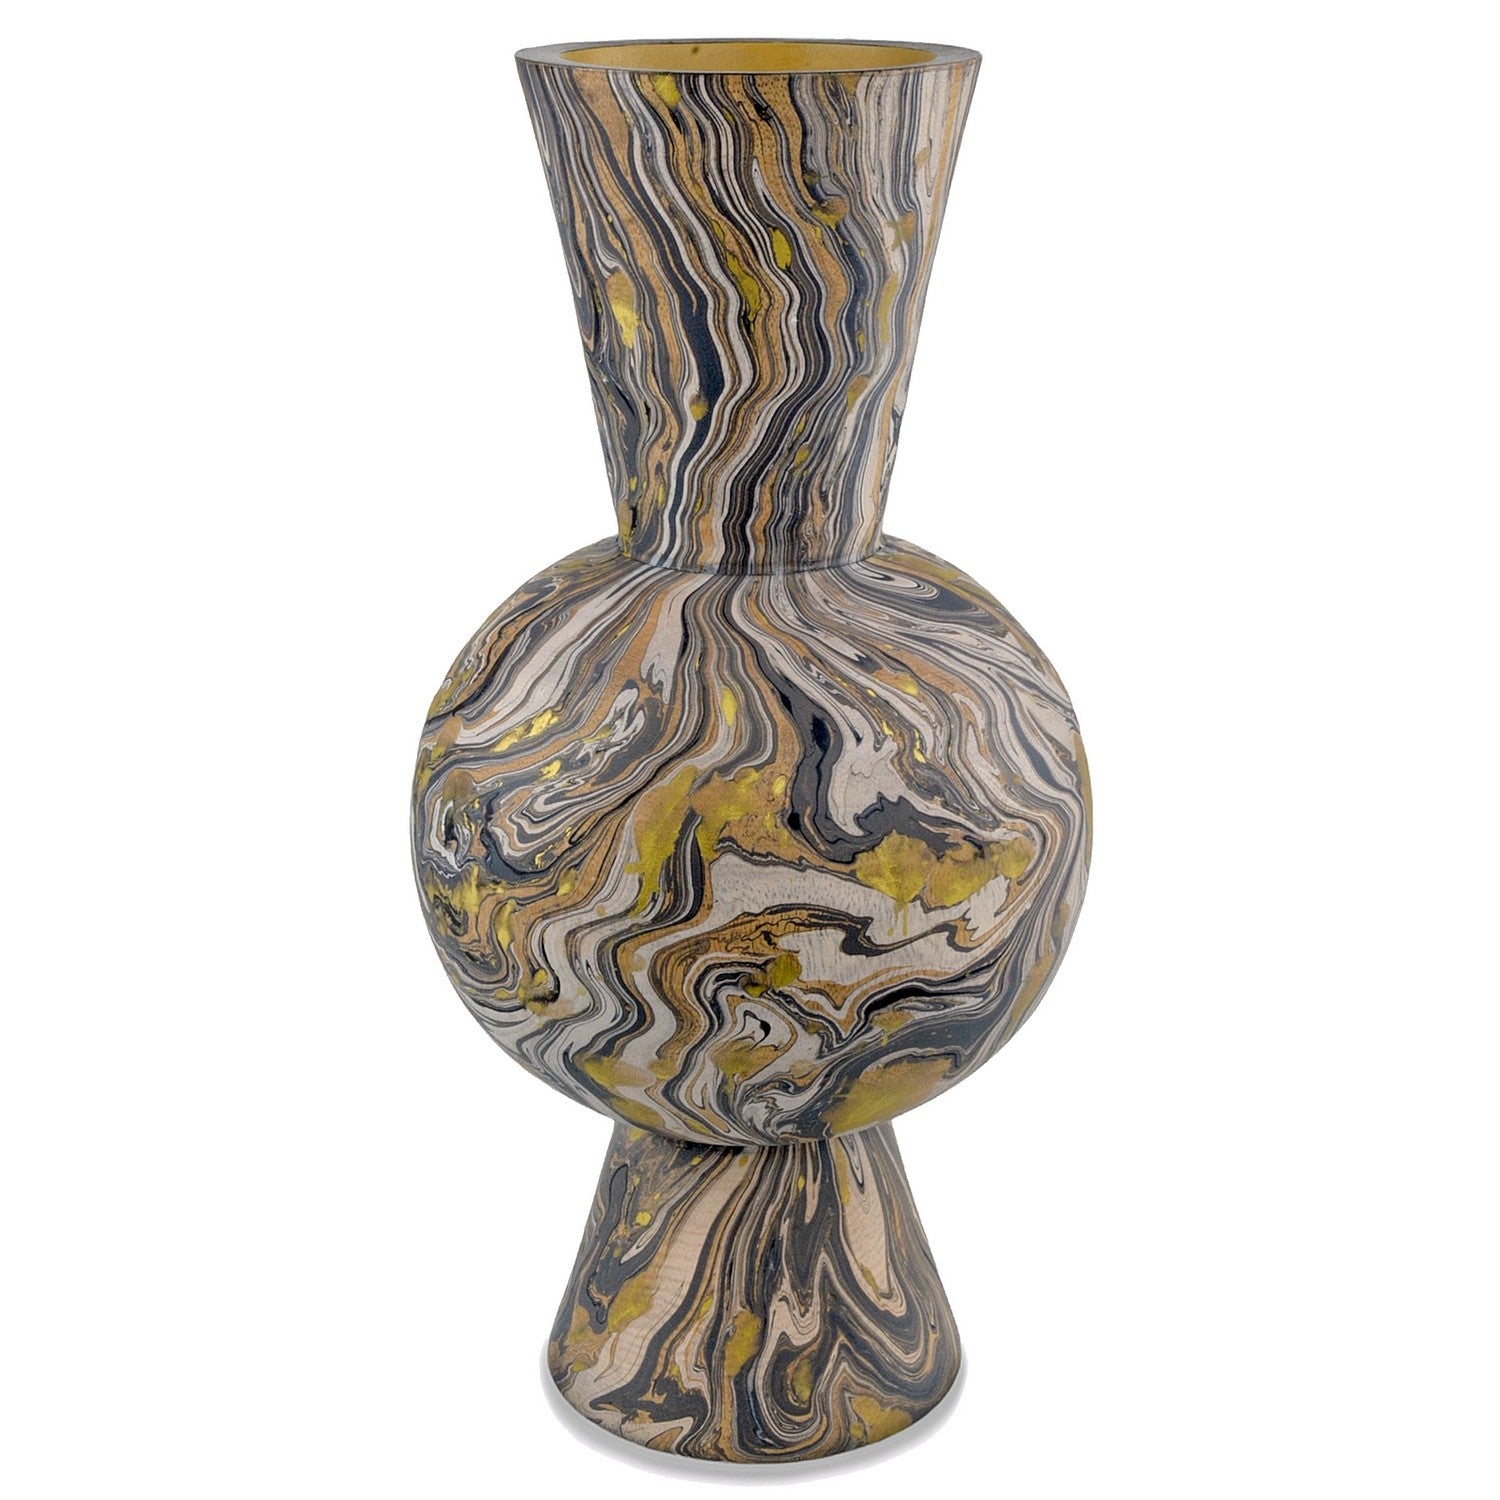 Currey and Company - 1200-0732 - Vase - Black/Brown/White/Gold